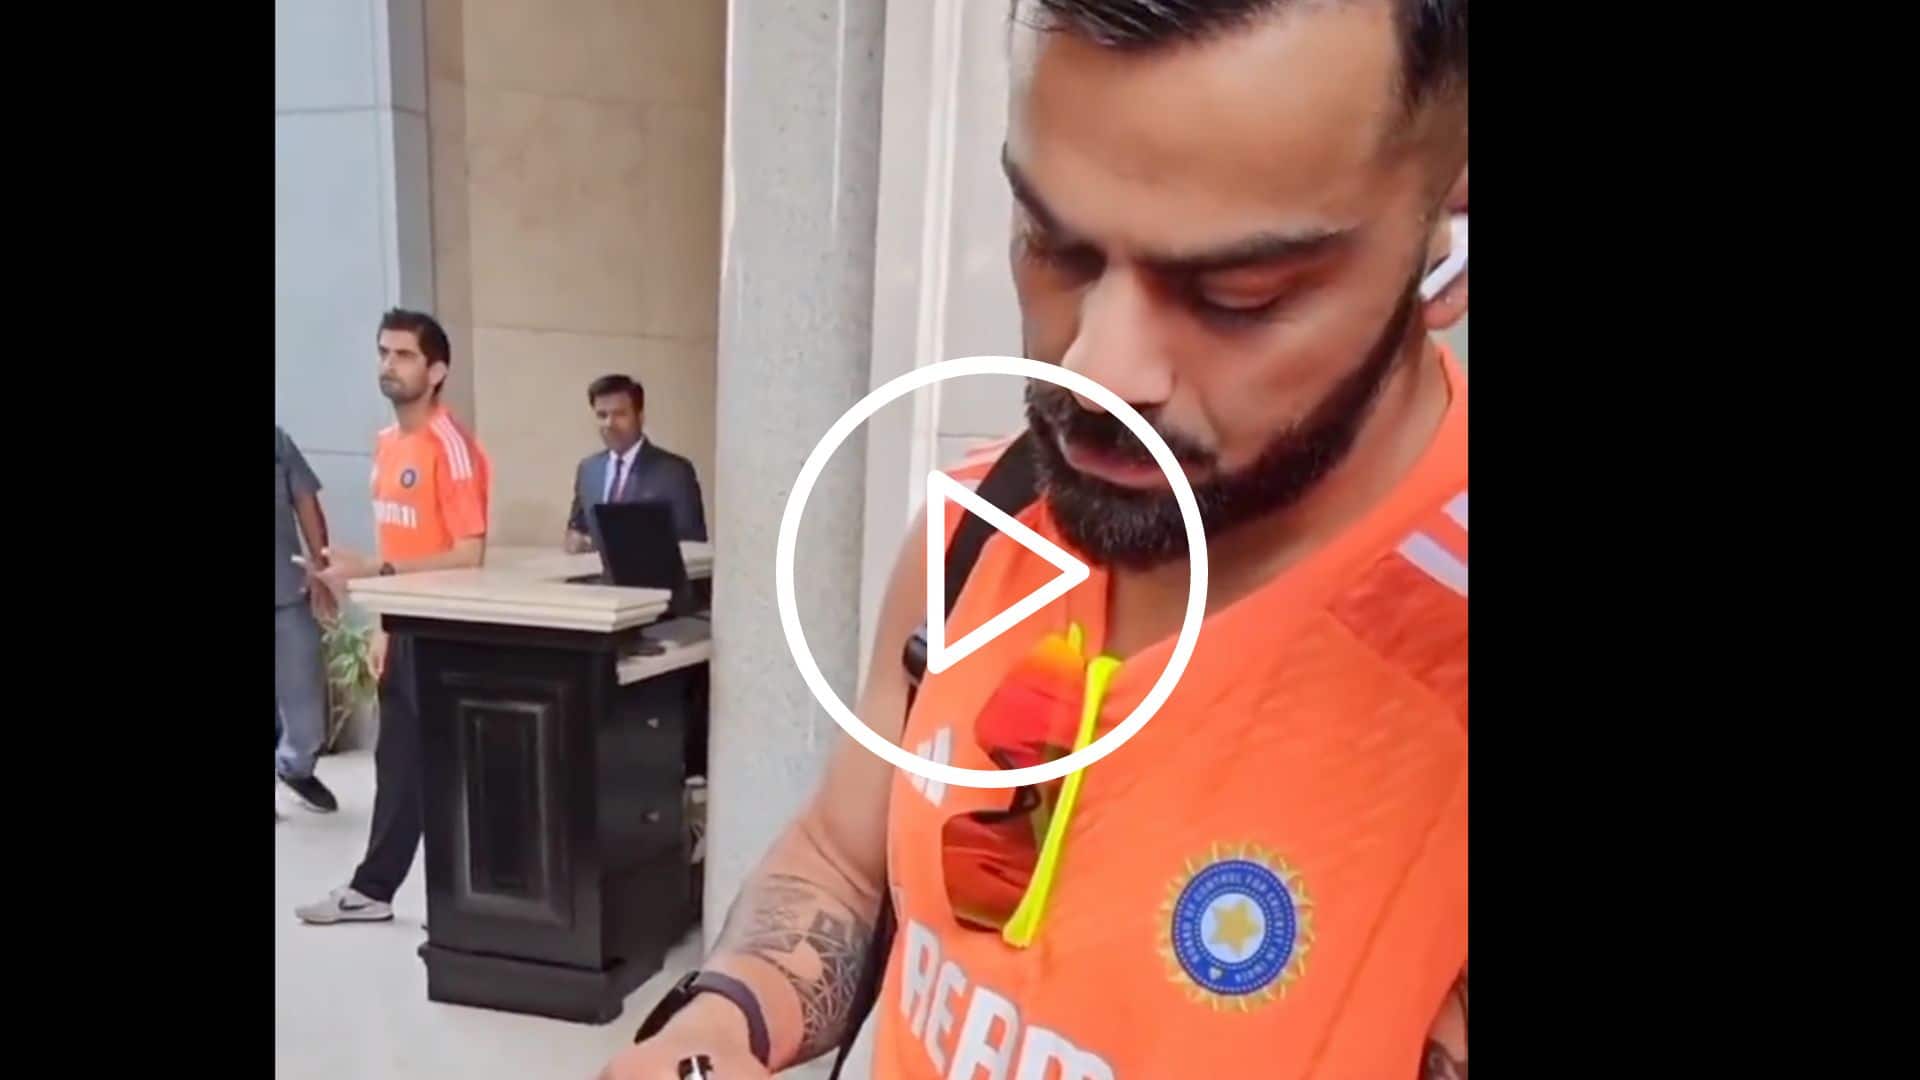 [WATCH] Virat Kohli's Beautiful Gesture For A Fan Ahead Of World Cup Game vs AUS